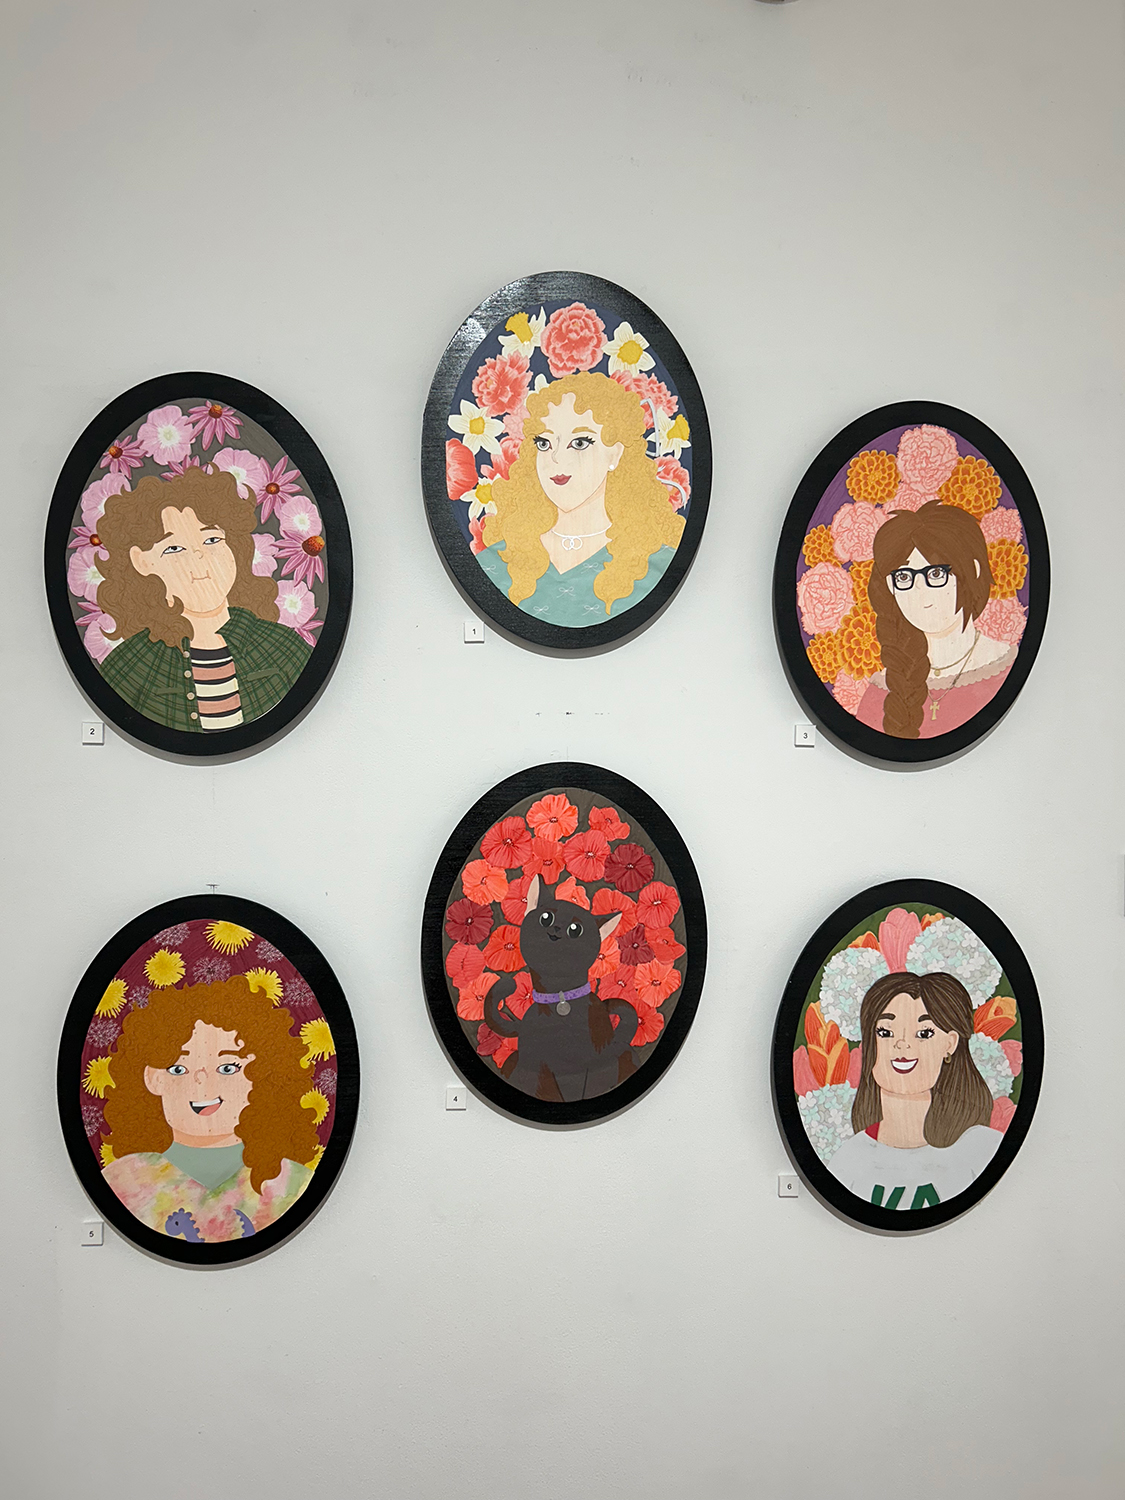 A collection of six cut-paper portraits. Each portrait is placed on a black plywood oval.